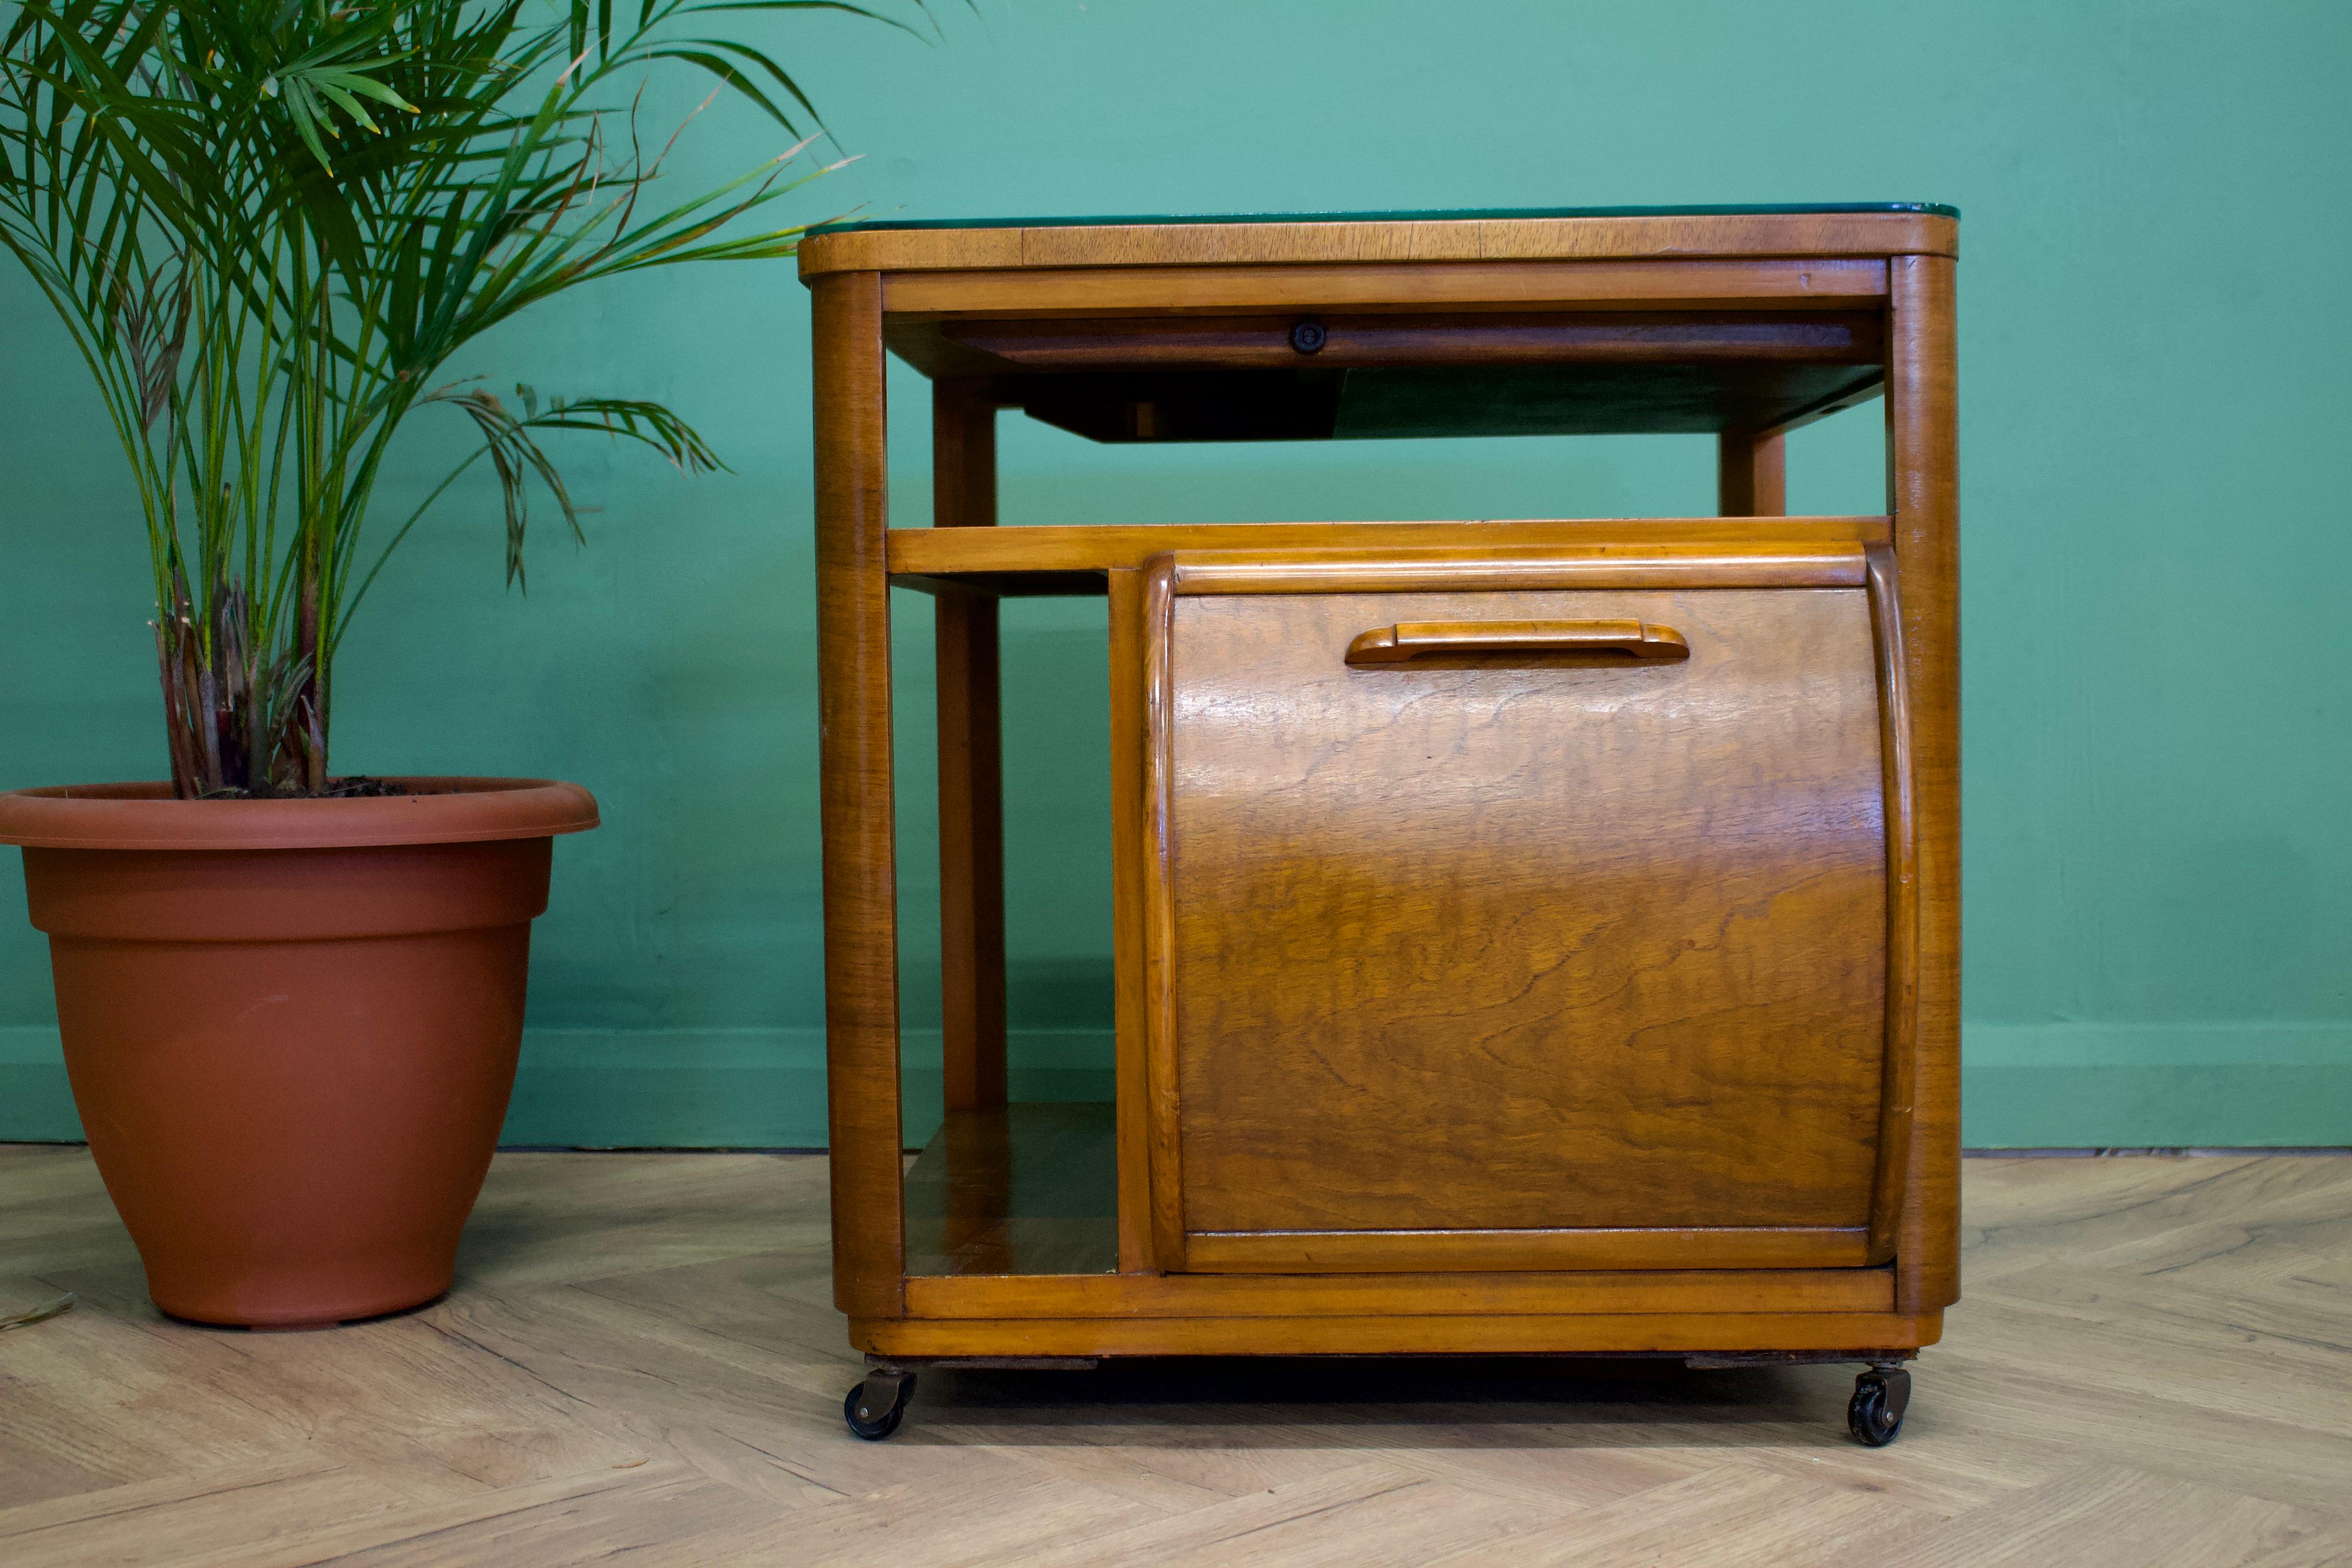 A walnut Art Deco drinks trolley / coffee table by Incorporall

Featuring two pull down doors and a glass top (which can be used without)

There is a pull out drinks tray and additional storage underneath this

The piece sits on castors.